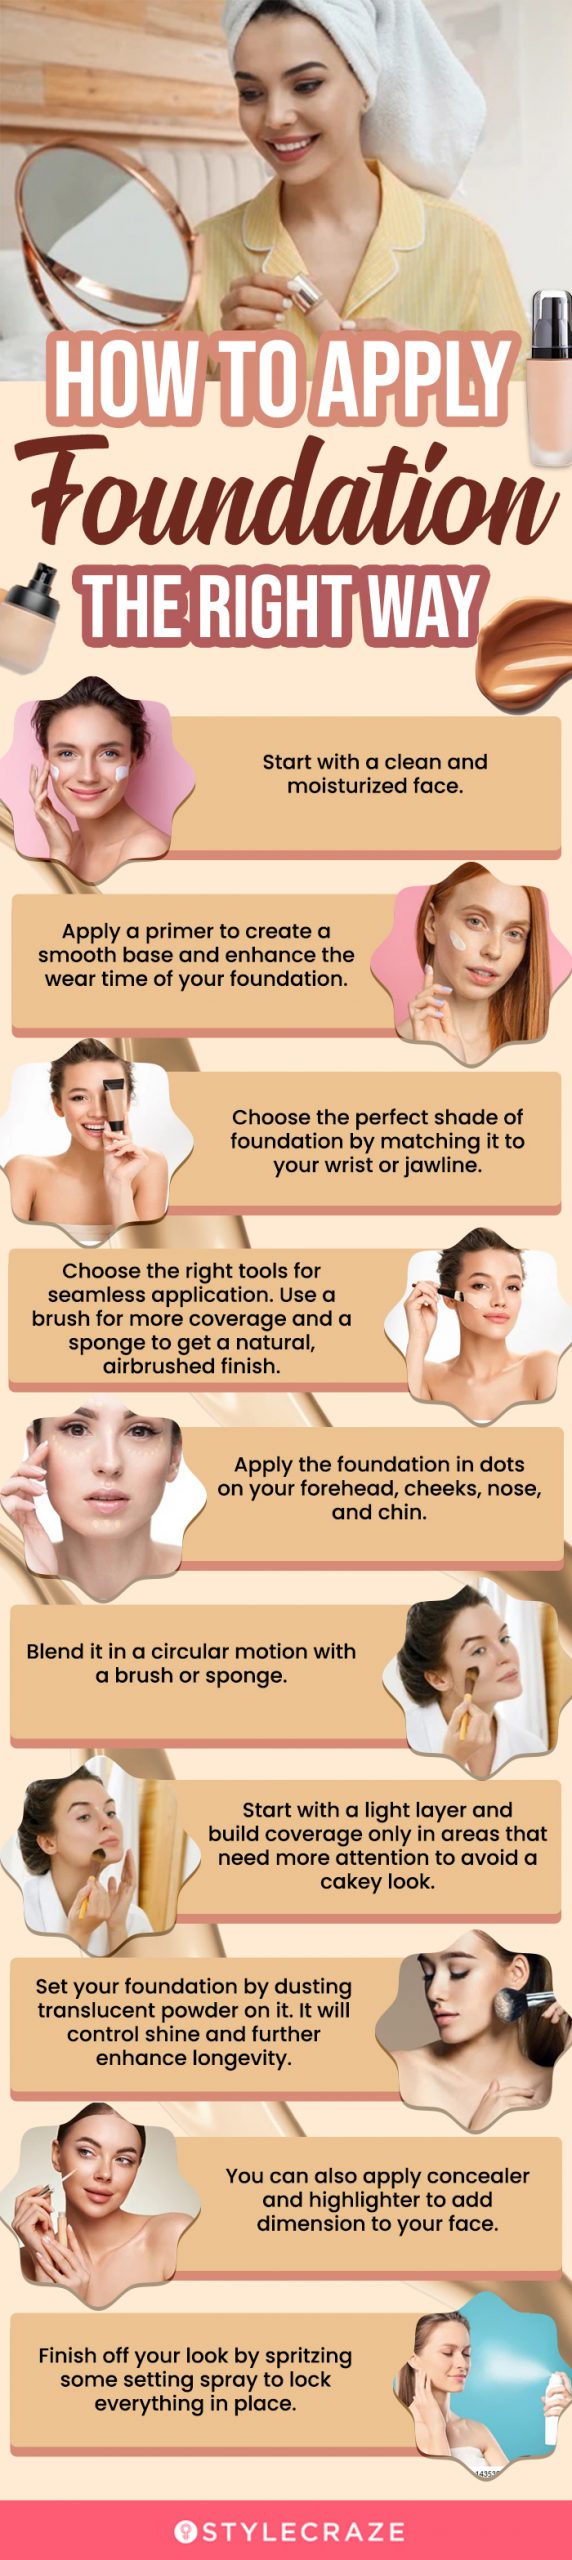 How To Apply Foundation The Right Way (infographic)